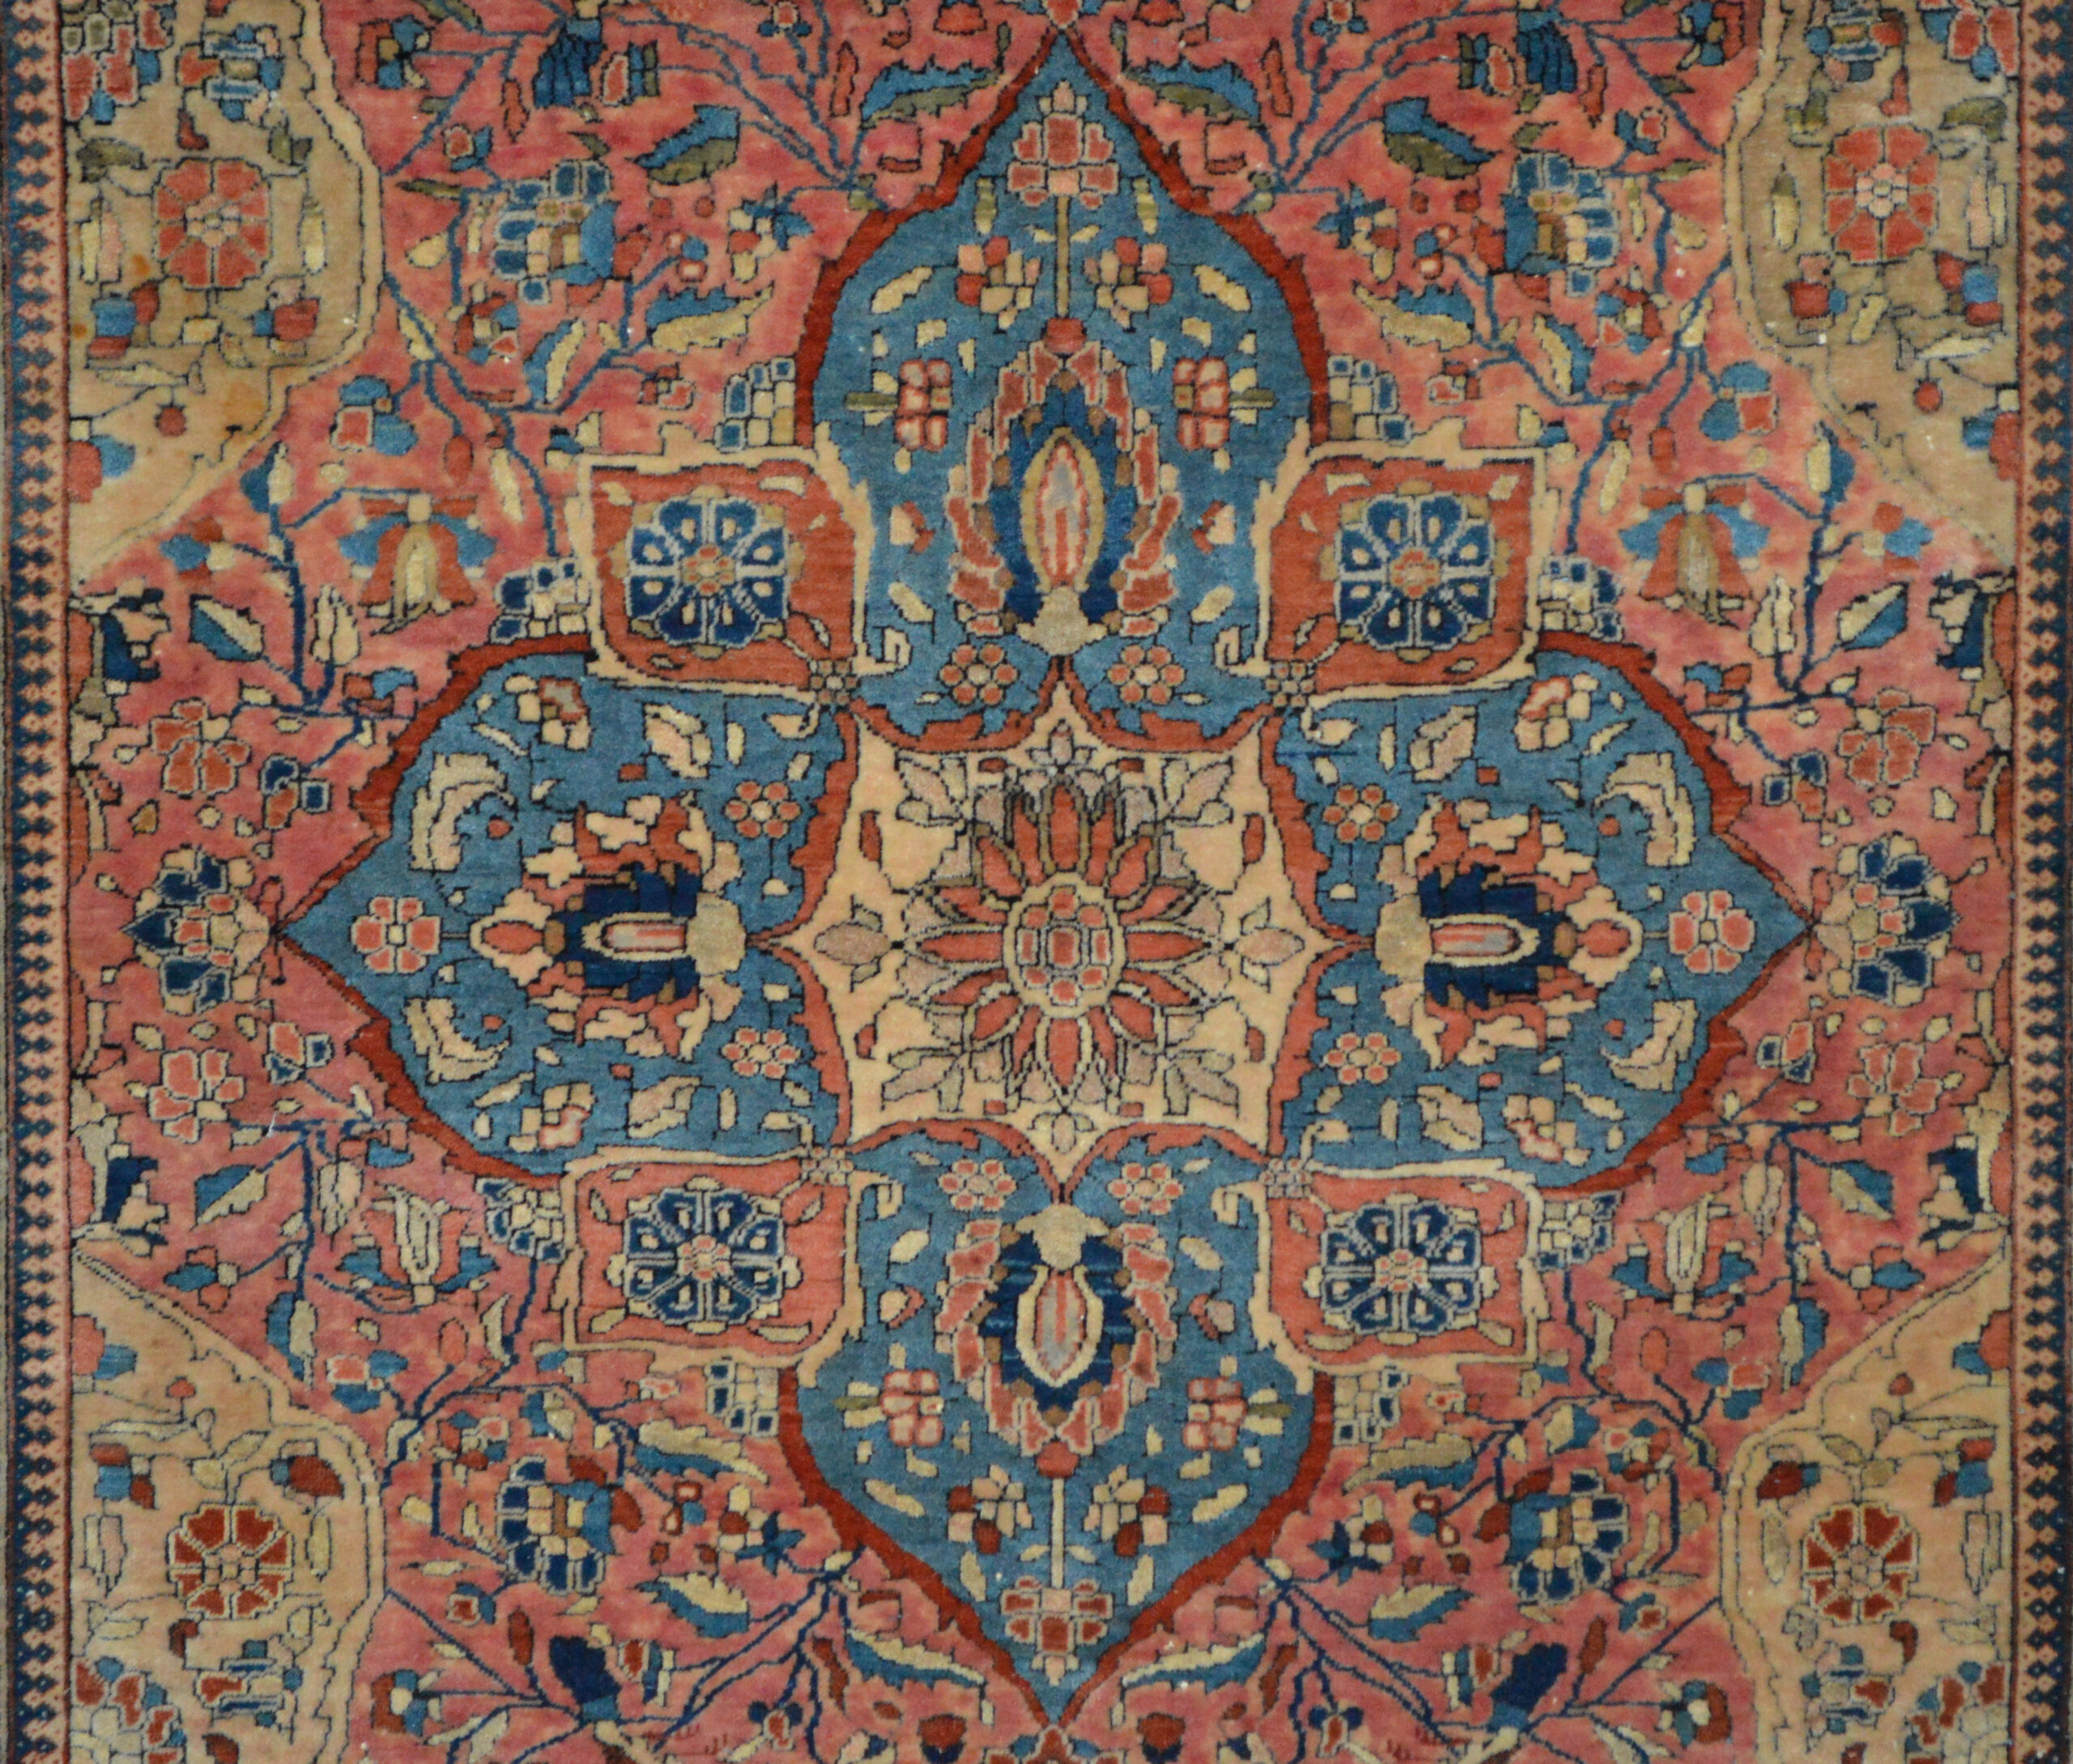 Sky blue Quatrefoil design edallin on a coral color field in an antique Persian Mohtasham Kashan rug, circa 1900, Douglas Stock Gallery specialized in antique Persian Mohtasham kashan rugs and Fereghan Sarouk rugs